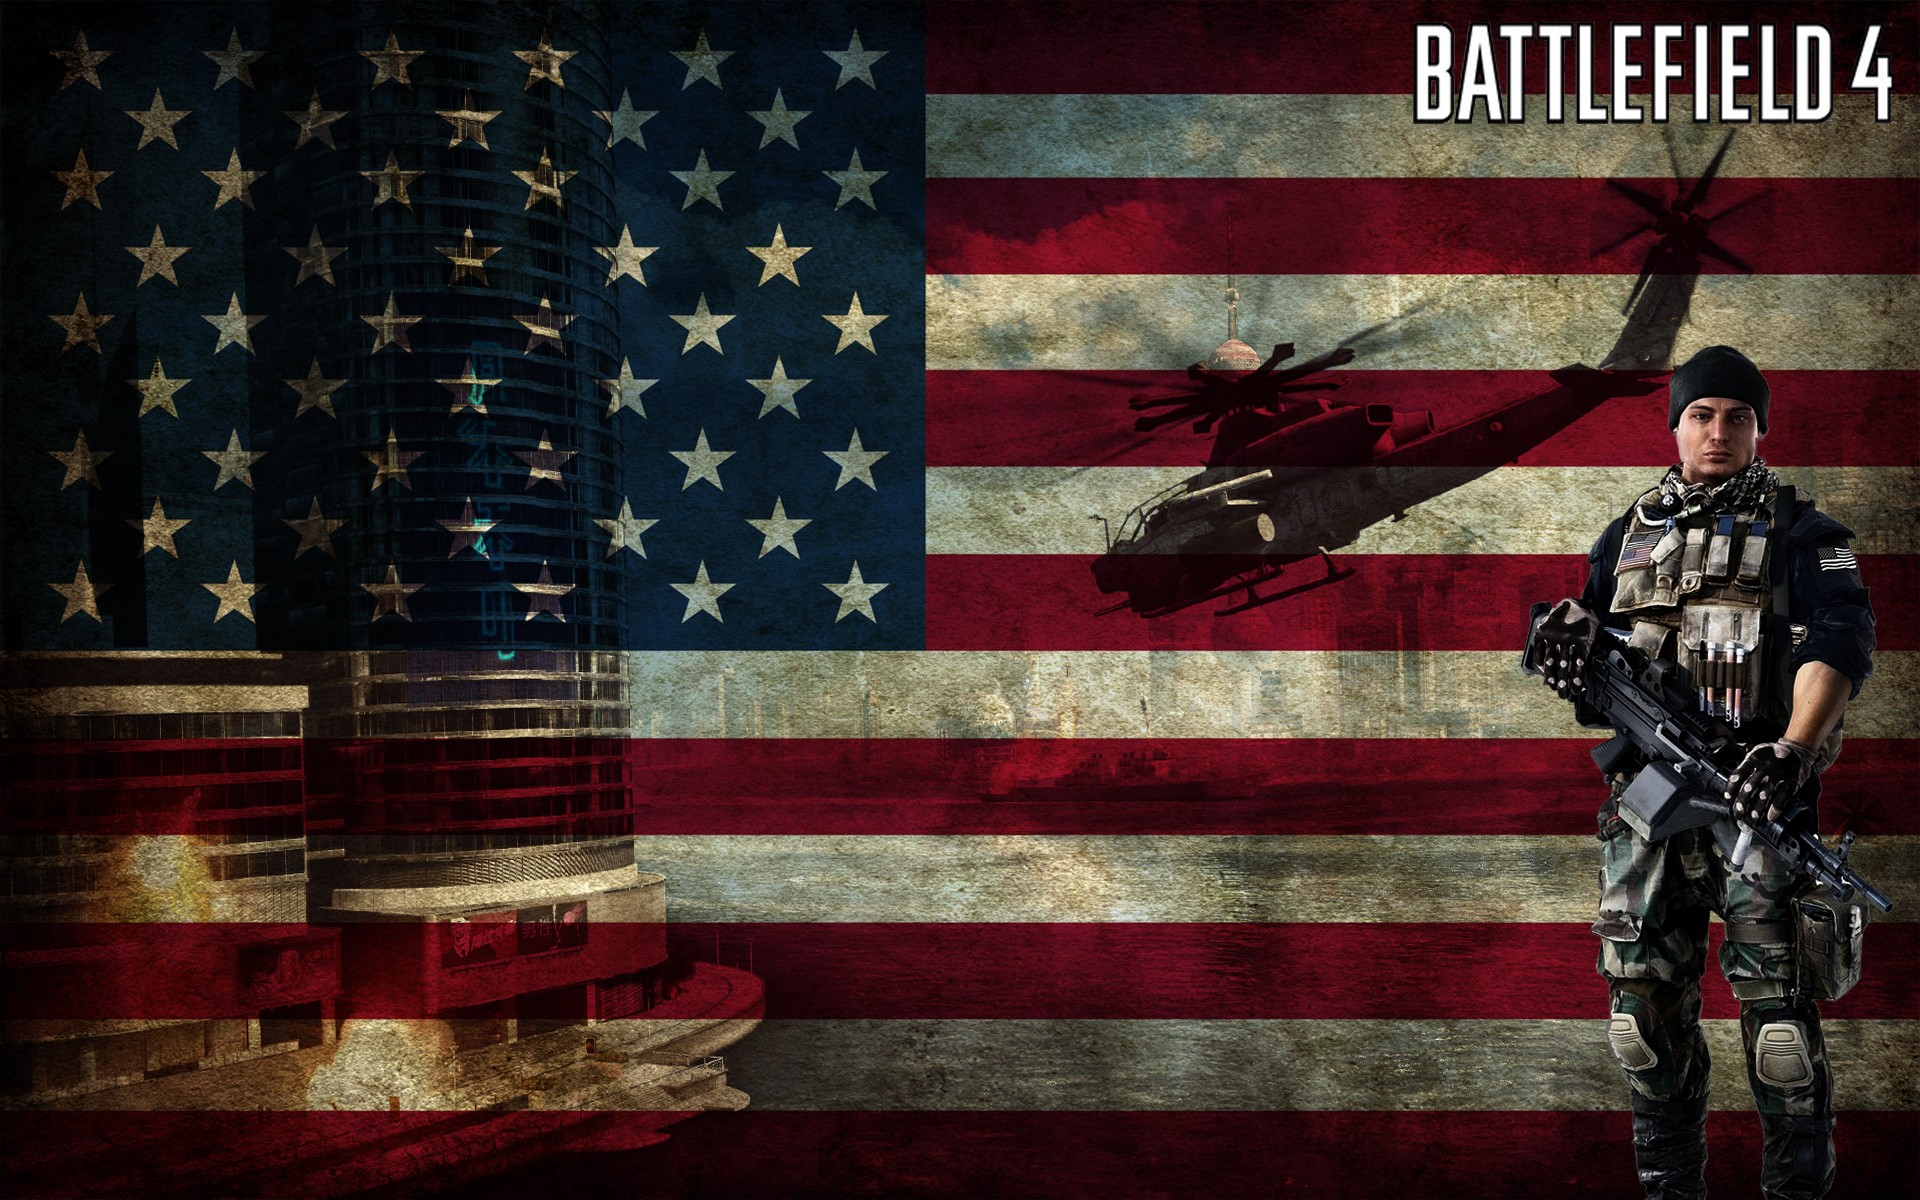 helicopters, American flag, USA, Battlefield 4 Wallpaper